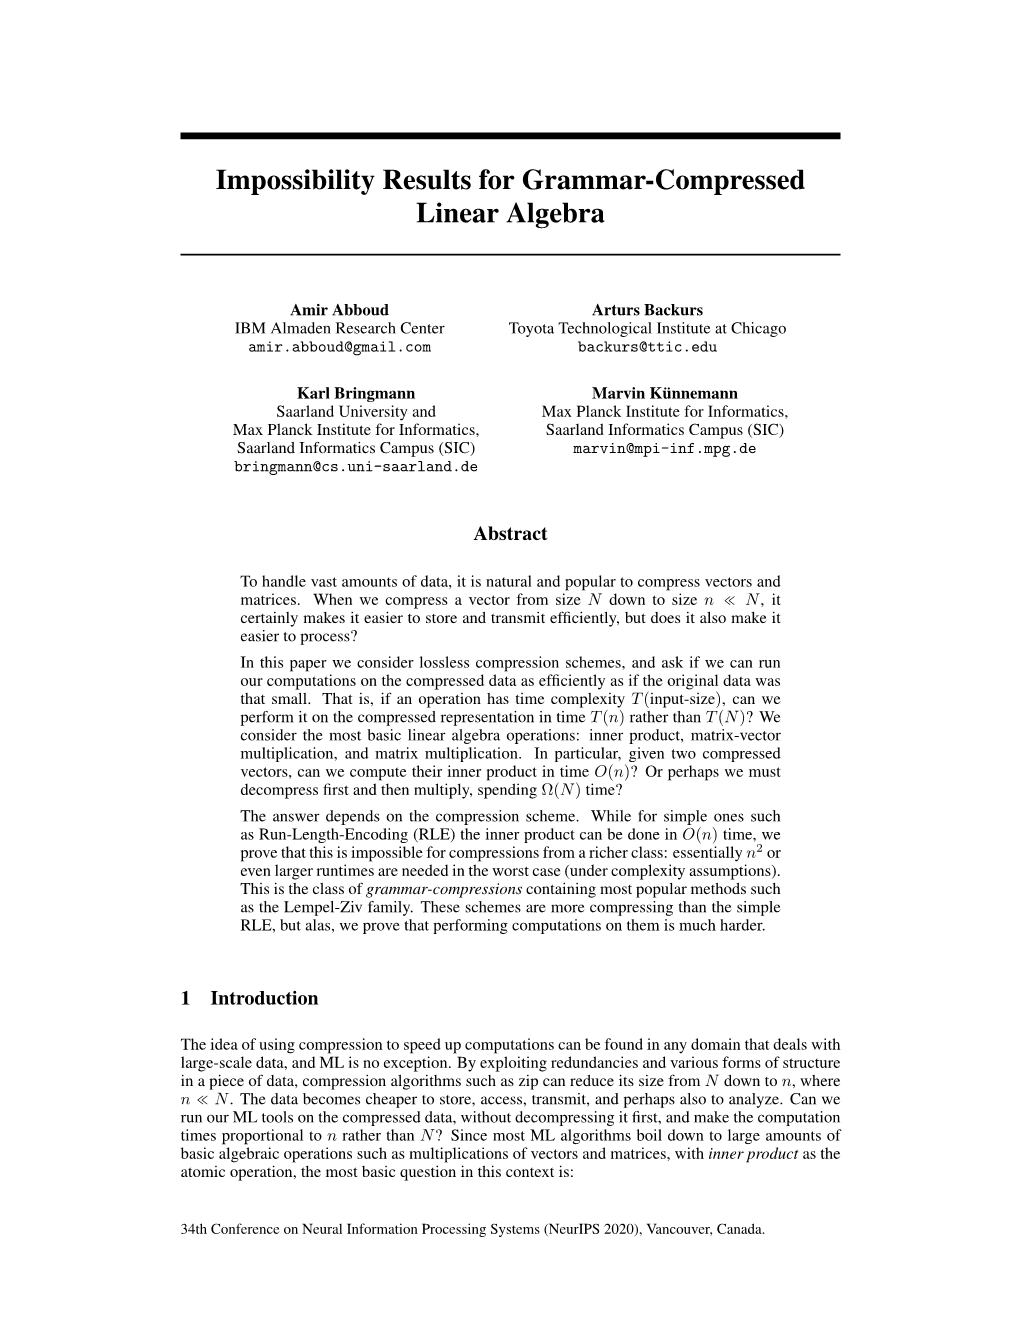 Impossibility Results for Grammar-Compressed Linear Algebra